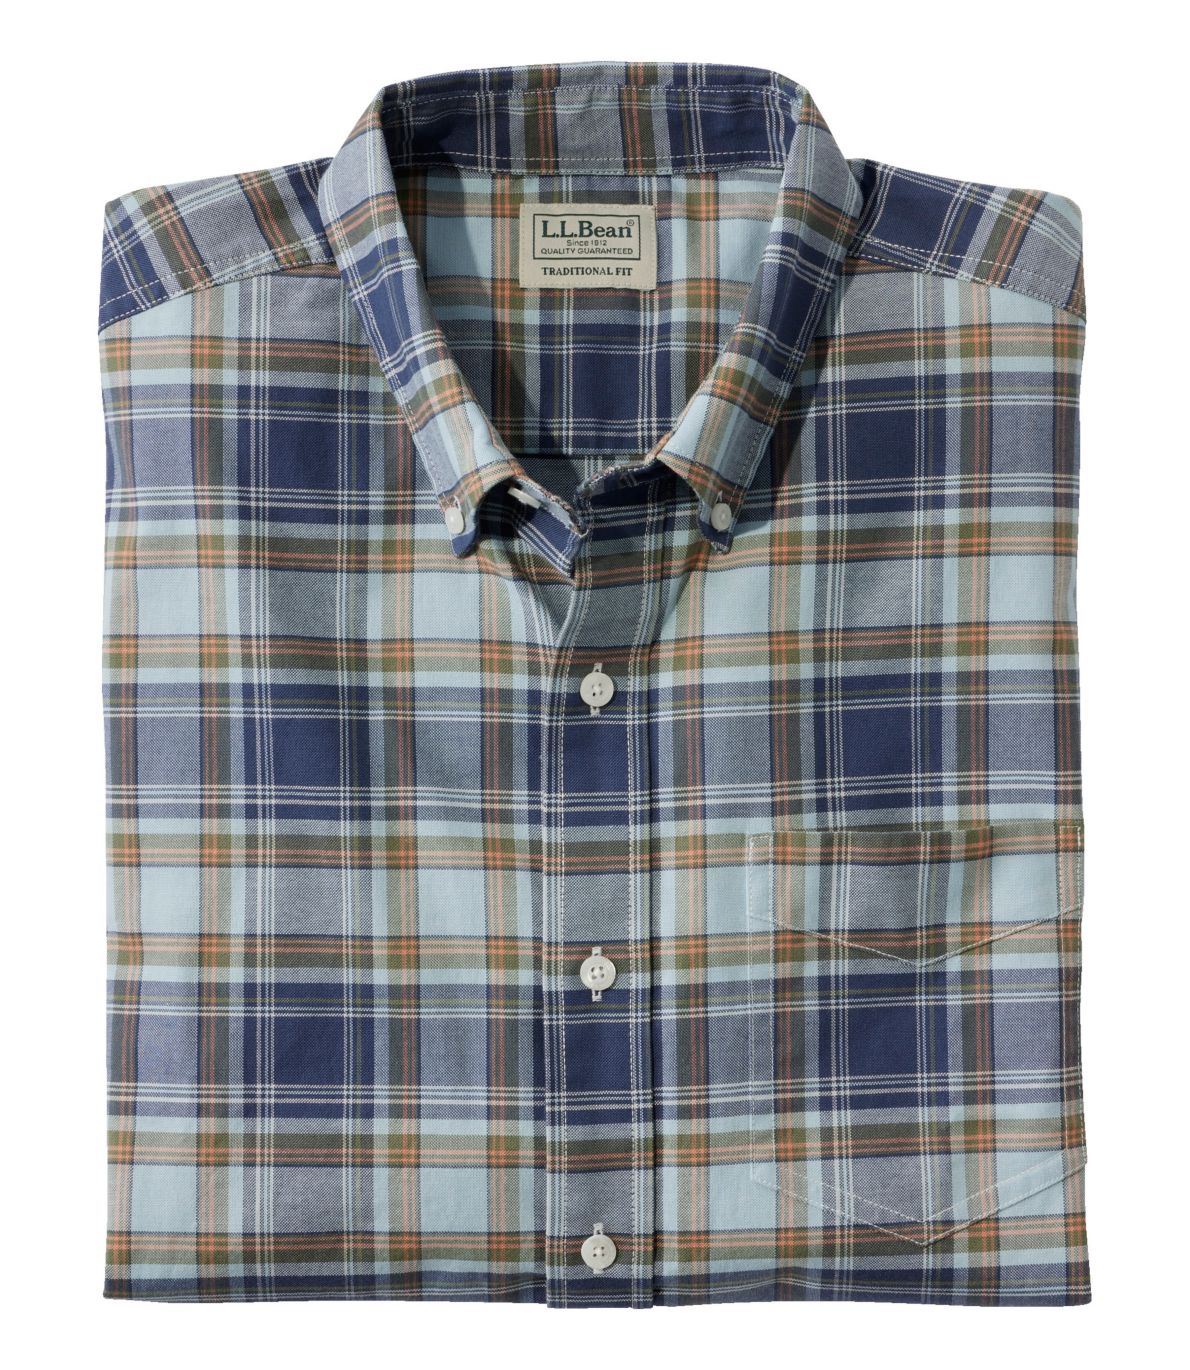 Men's Comfort Stretch Oxford Shirt, Traditional Untucked Fit, Plaid